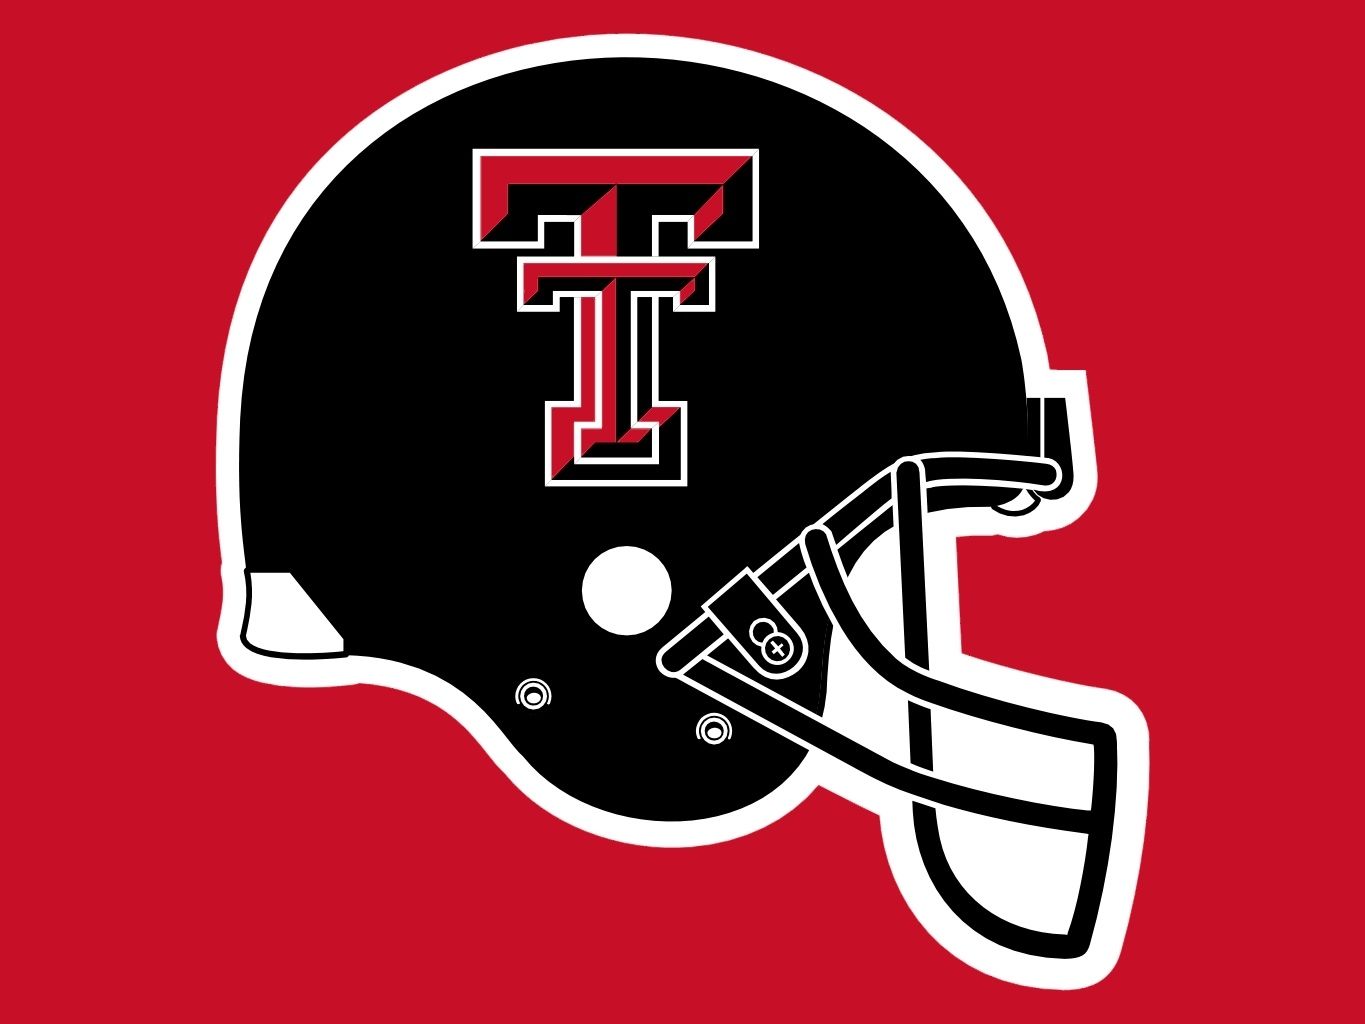 Texas Tech Athletics makes changes for game days